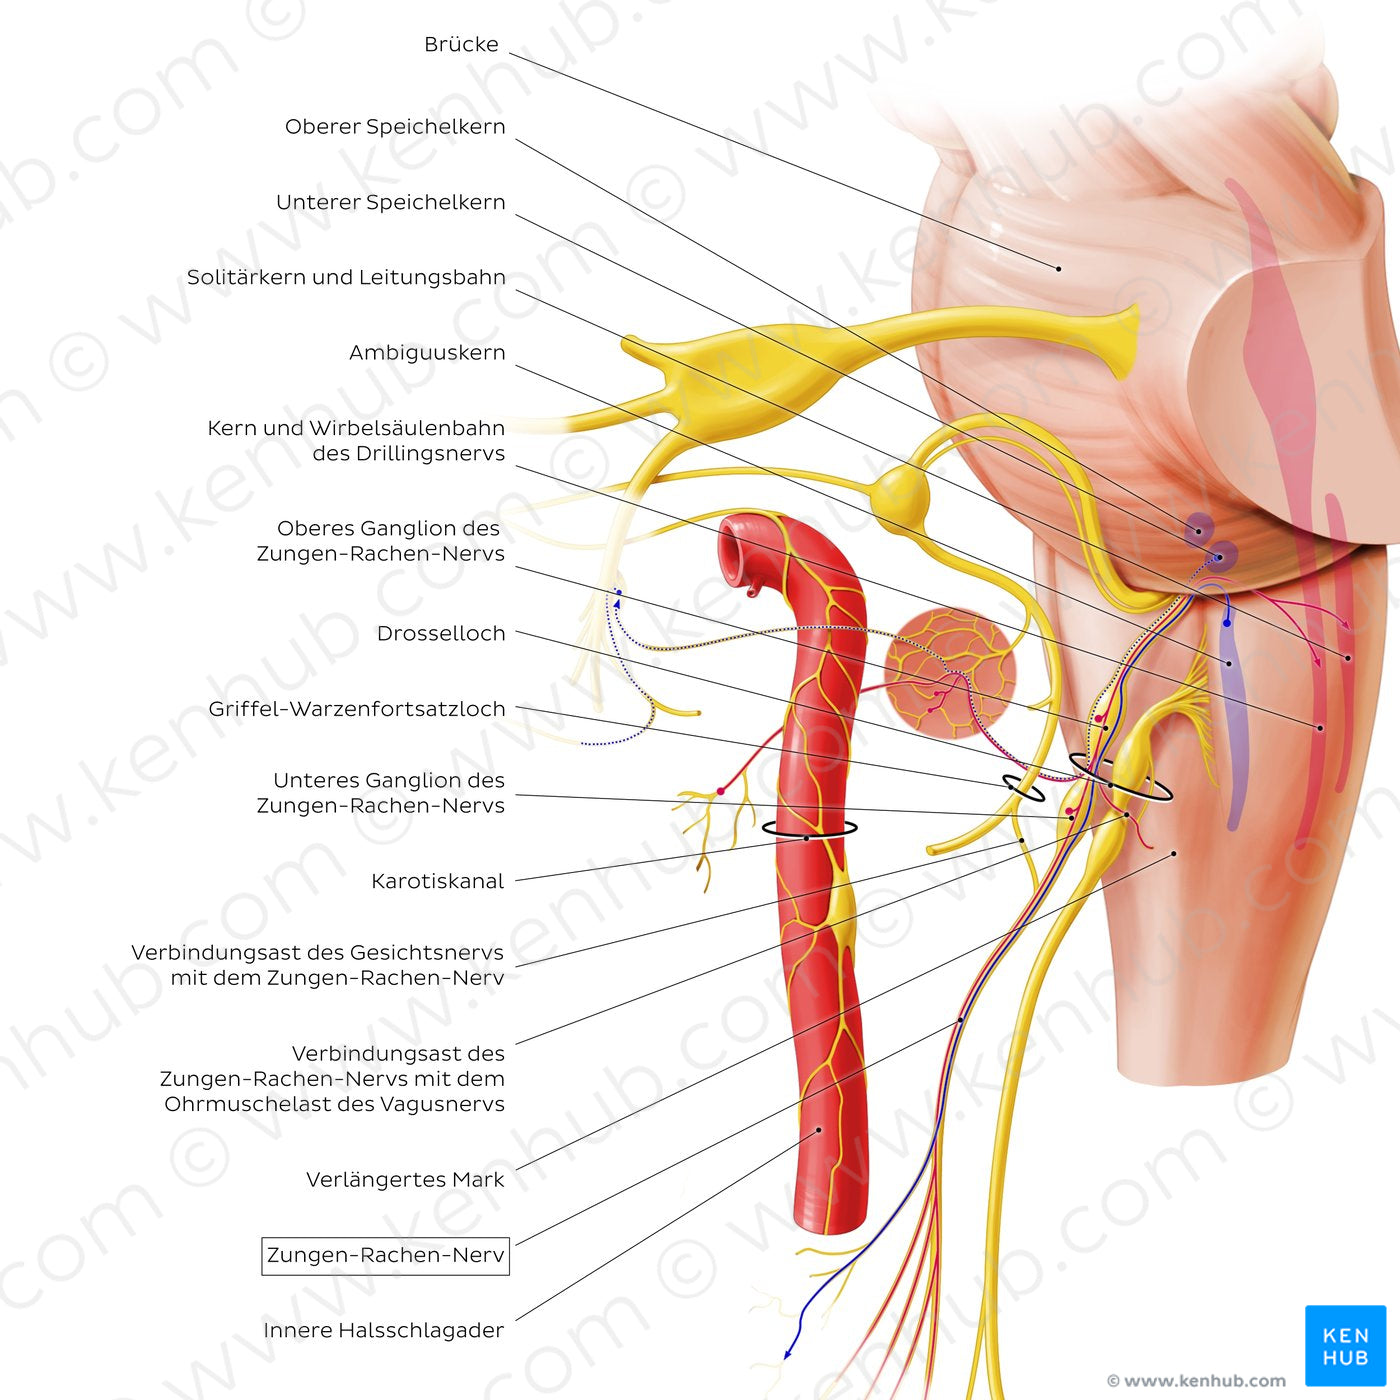 Glossopharyngeal nerve (origin and proximal branches) (German)